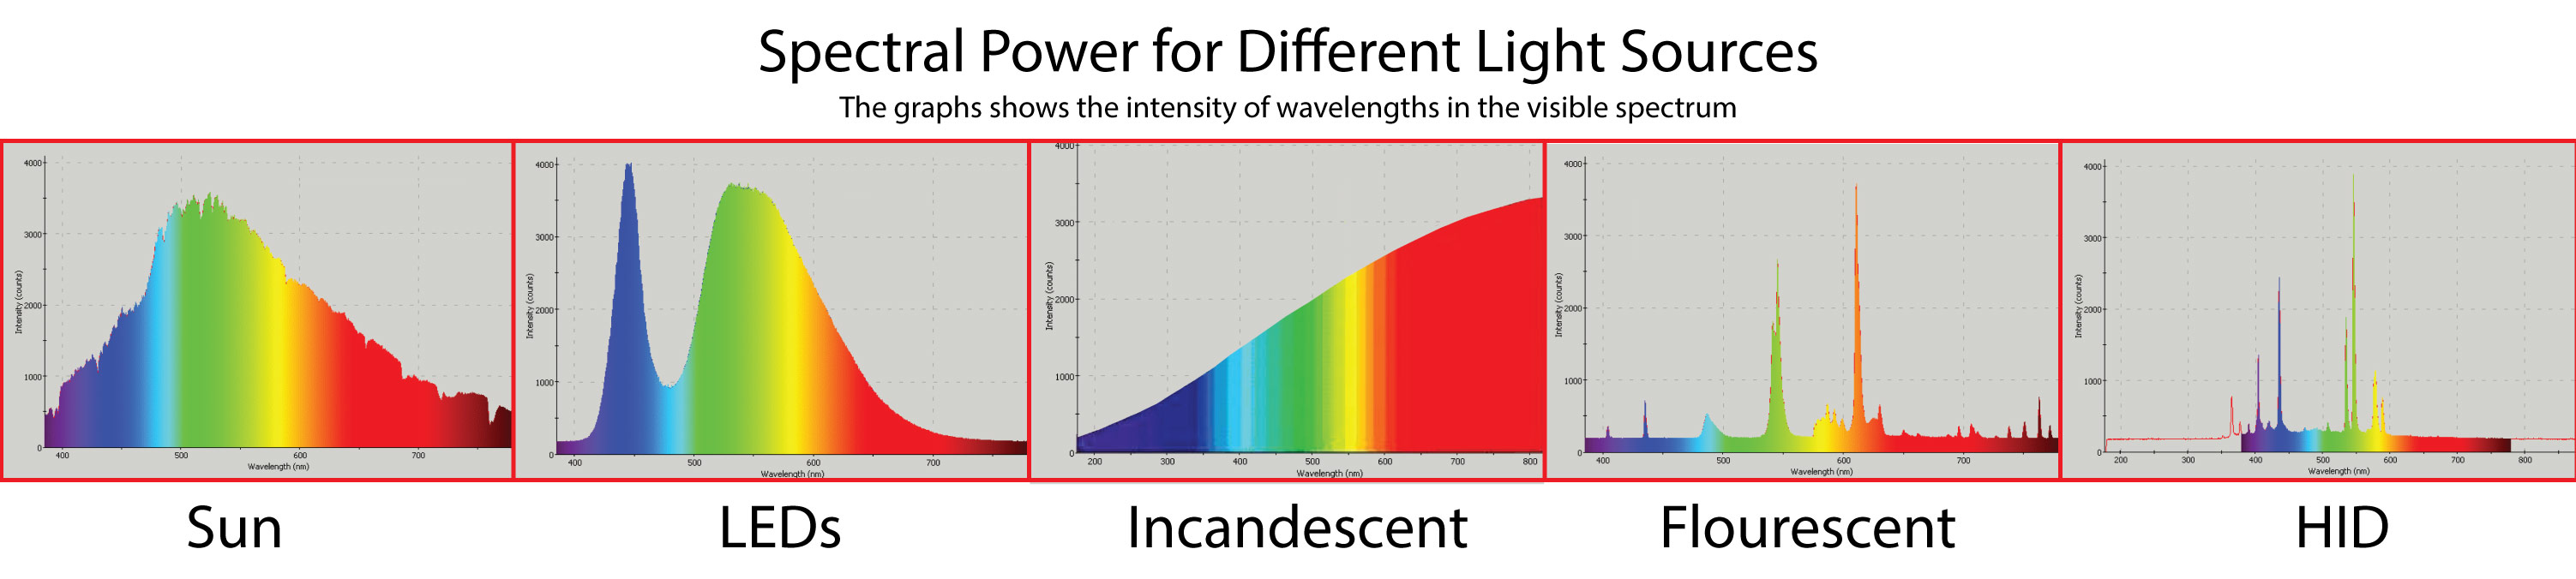 Visual graph showing spectral power for different light sources.